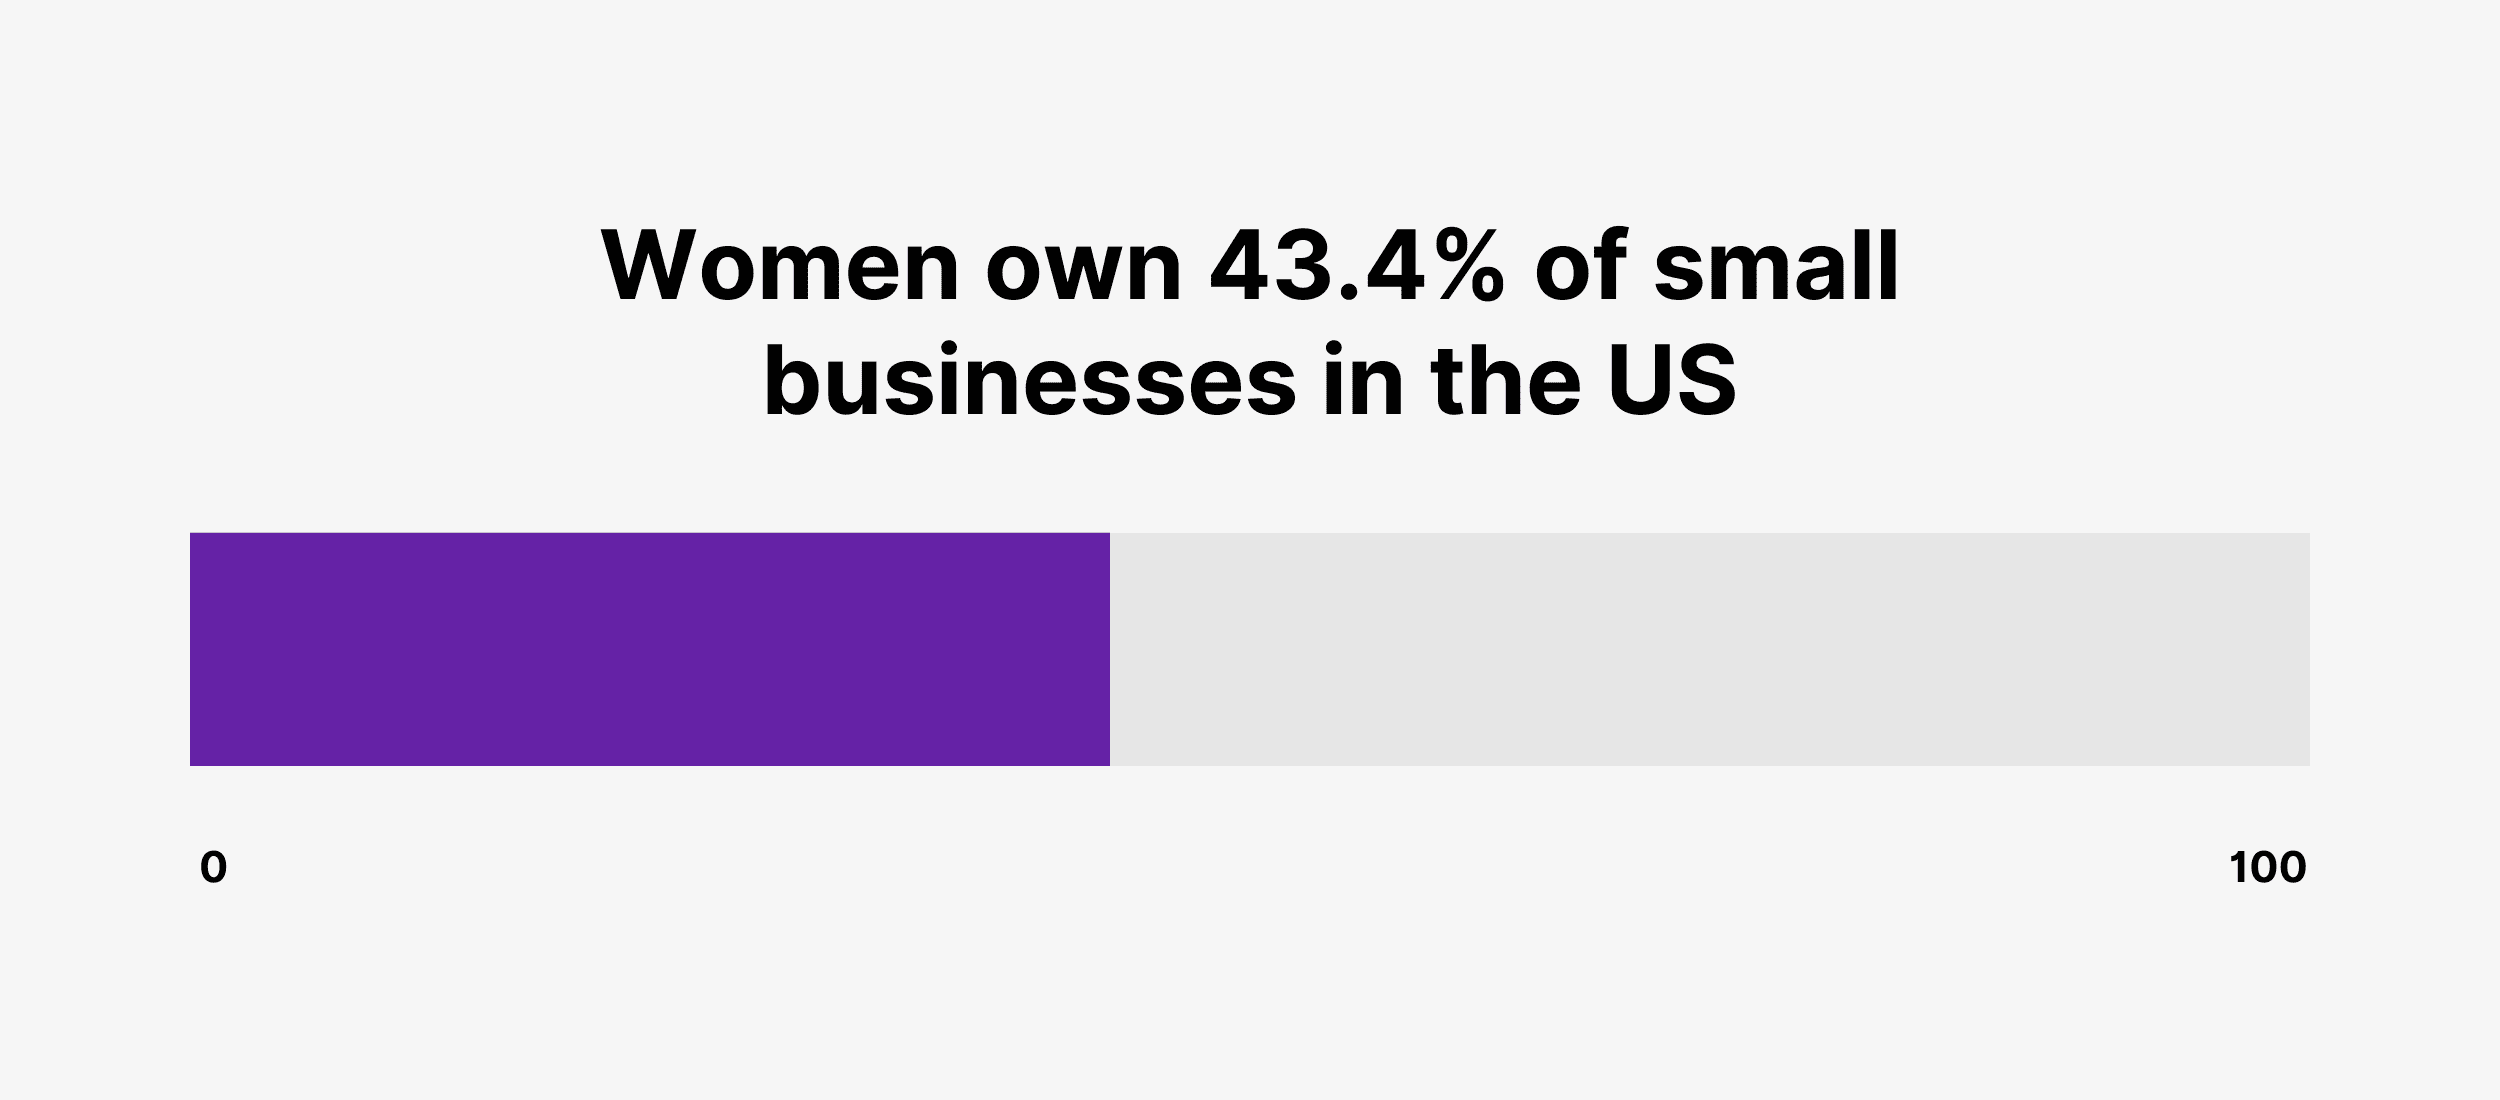 Women own 43.4% of small businesses in the US